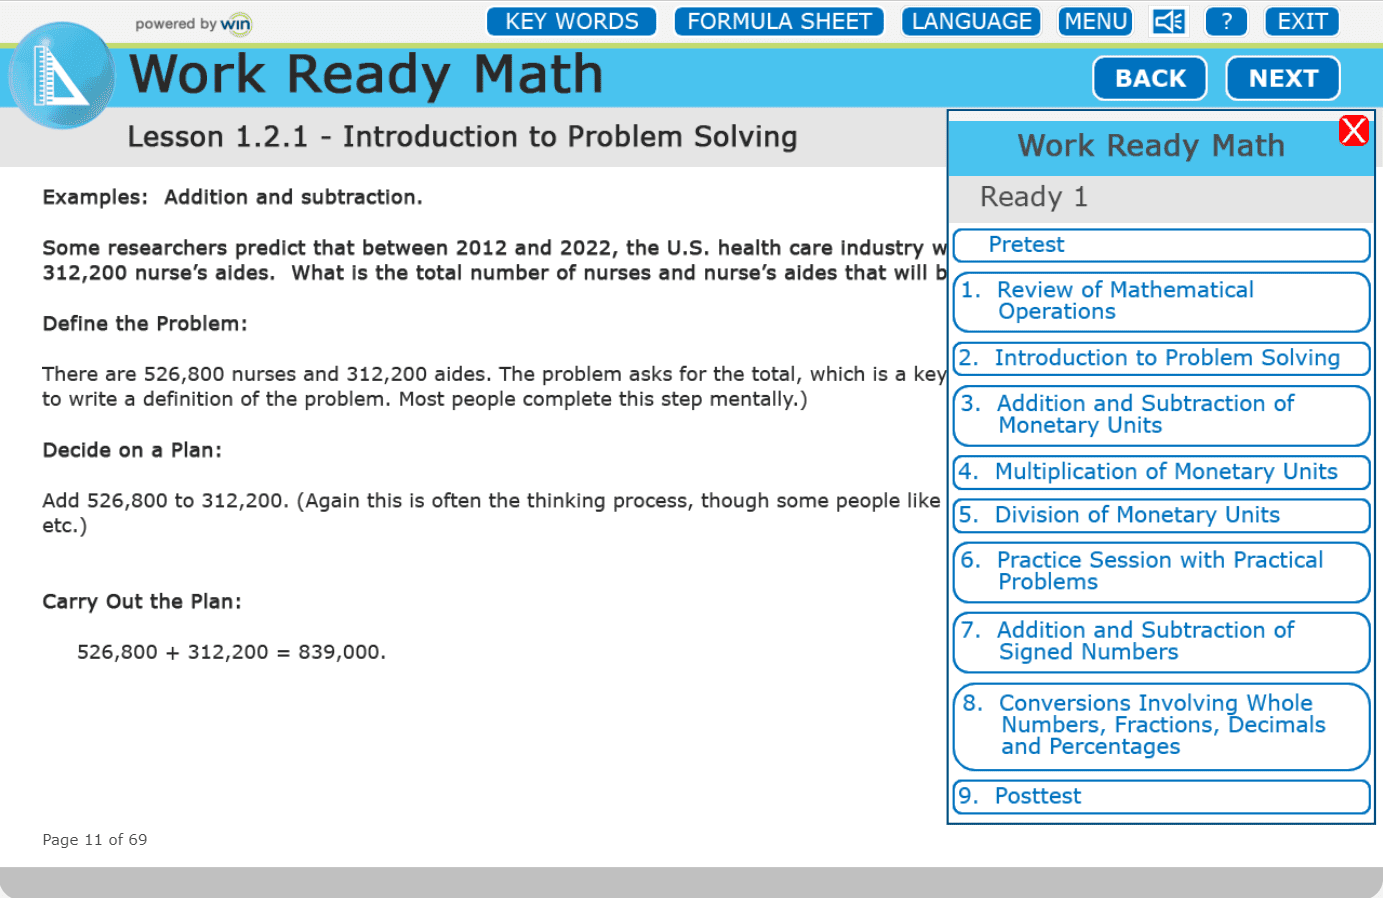 Work Ready Math Lesson 1.2.1: Introduction to Problem Solving